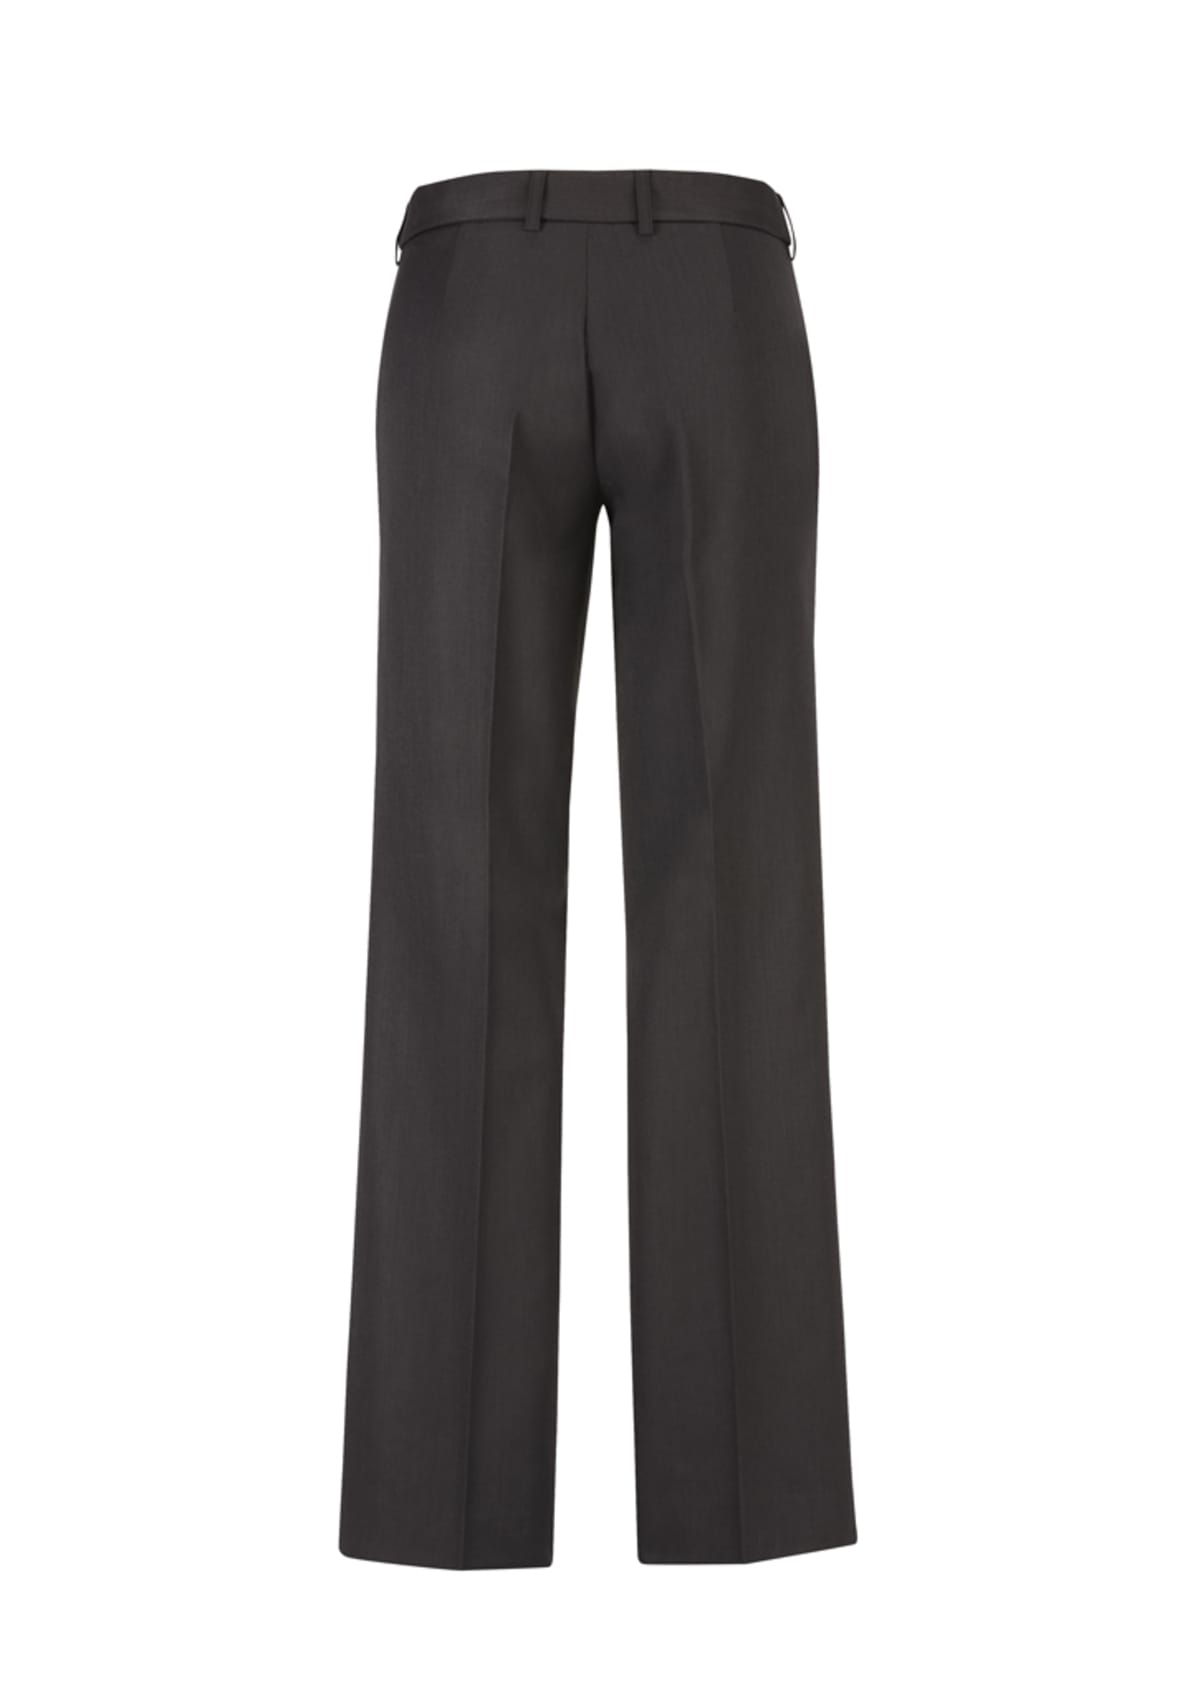 Cool Stretch Womens Adjustable Waist Pant